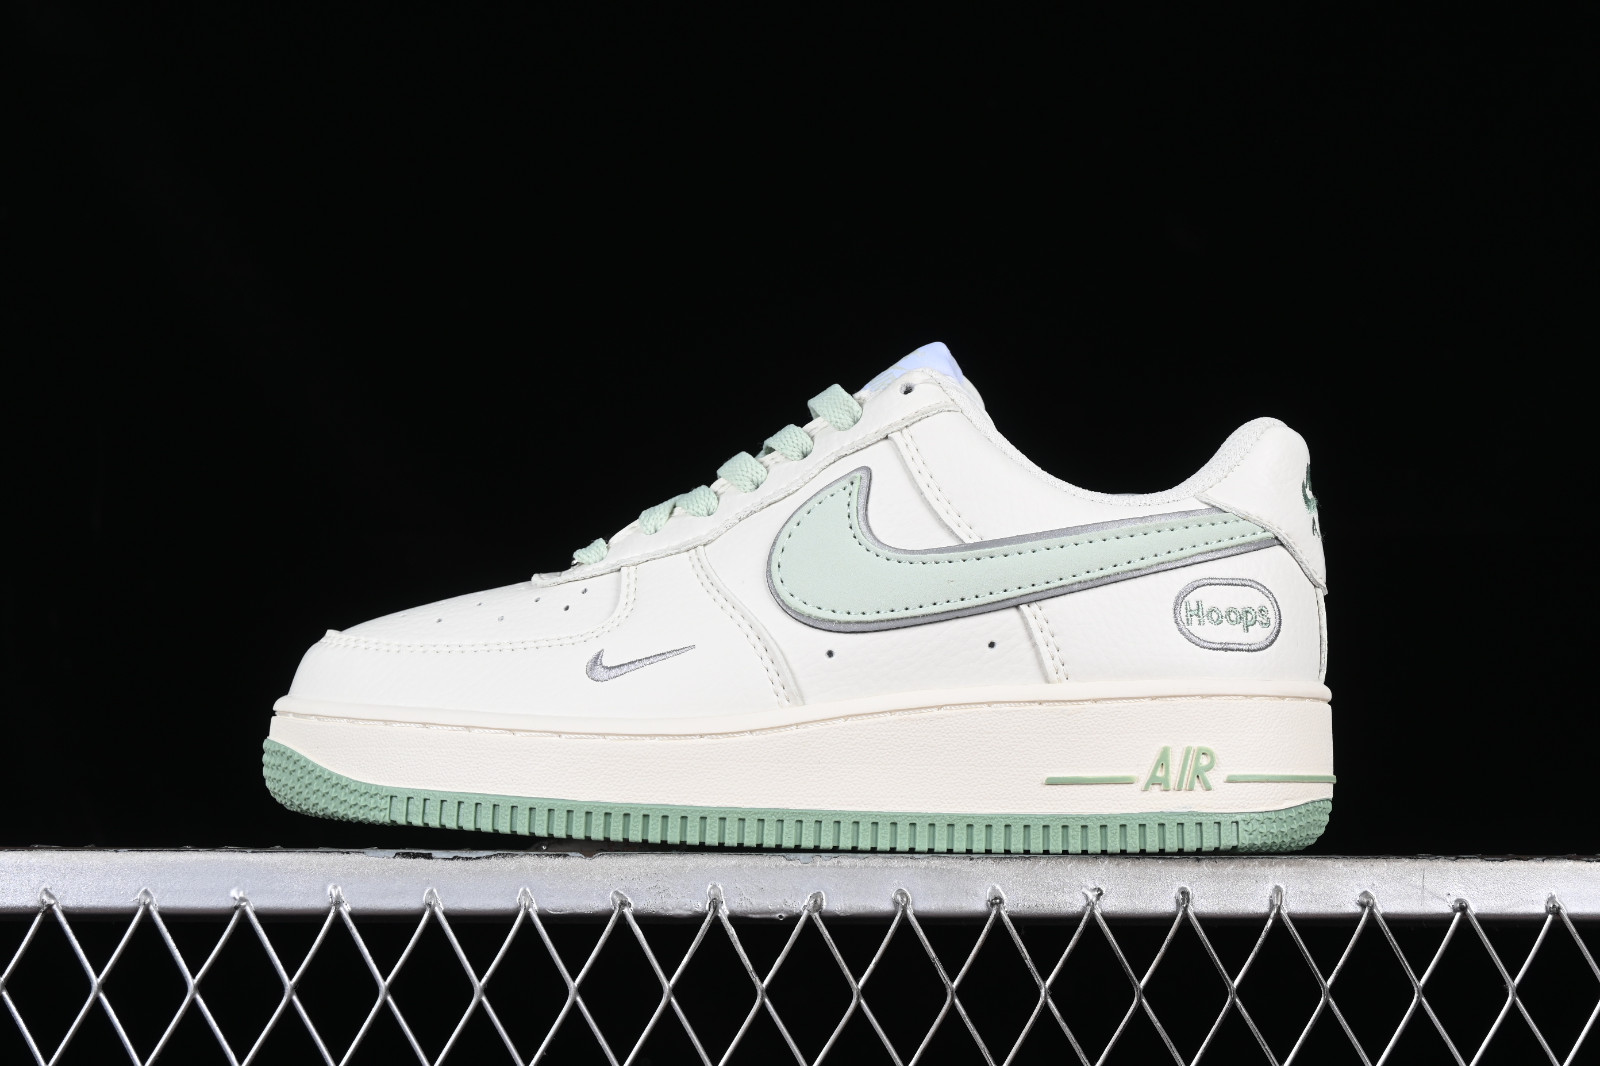 Nike Air Force 1 High Oil Green for Sale, Authenticity Guaranteed